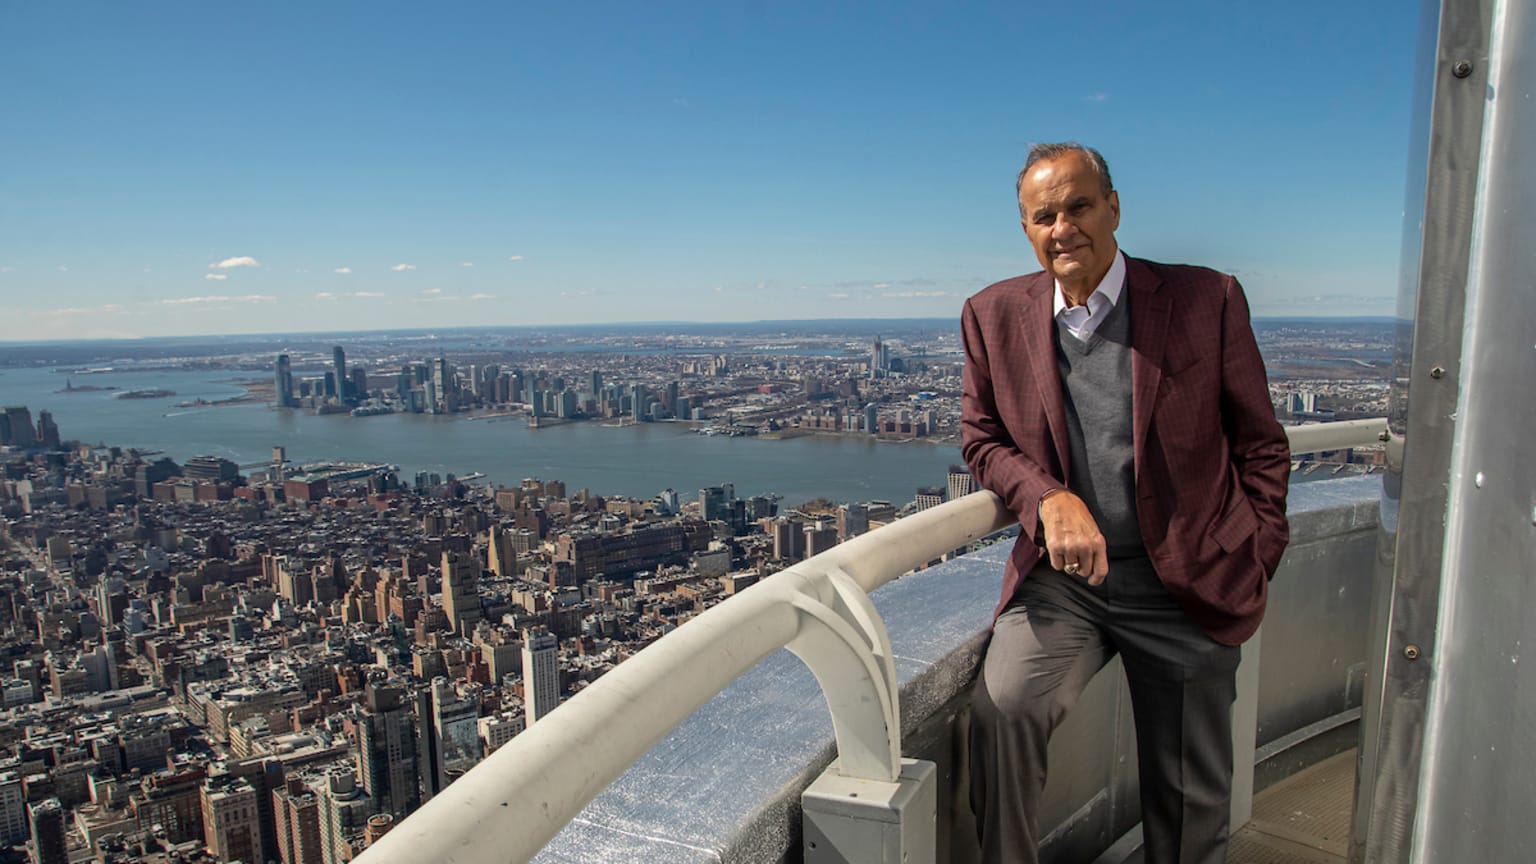 A man stands by the railing of an observation deck high above New York City